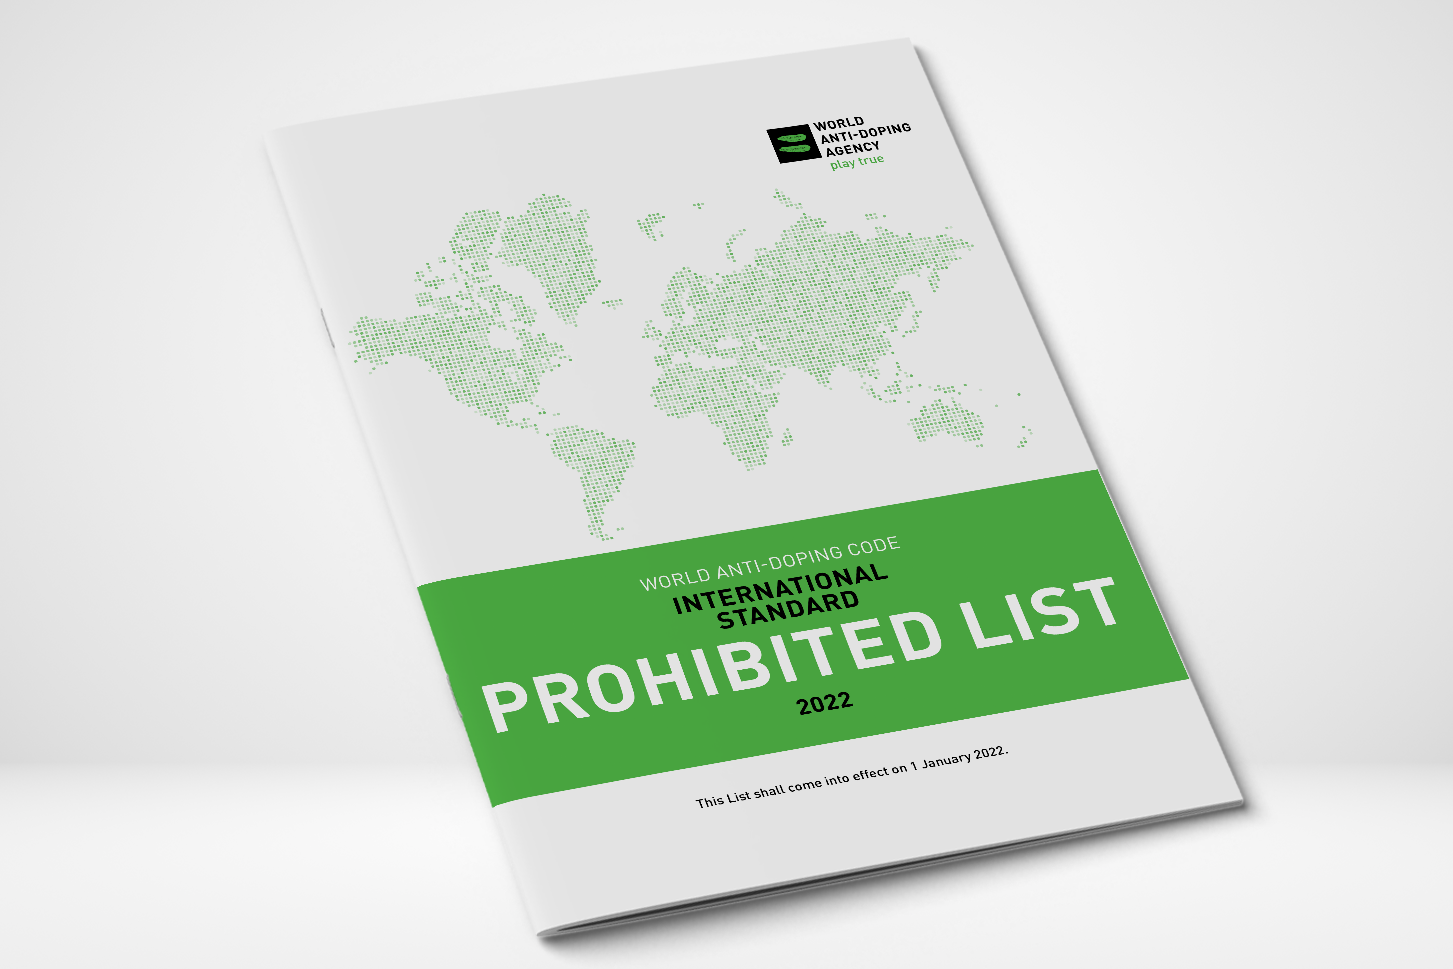 Photo of printed Prohibied List, a green and white document.